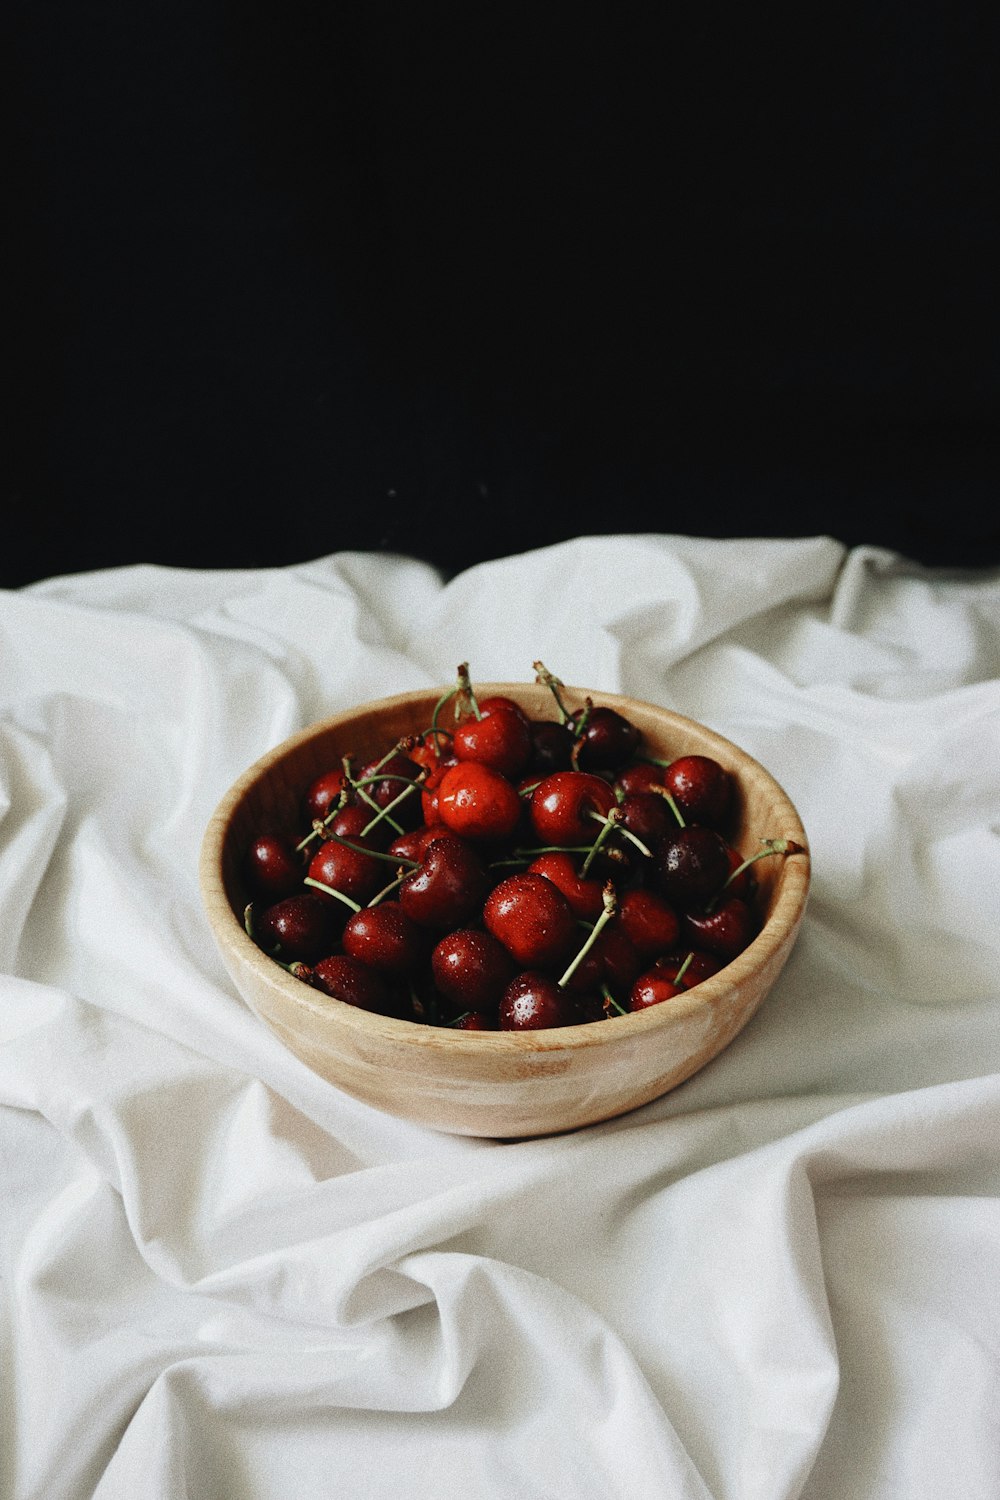 a bowl of cherries on a white cloth